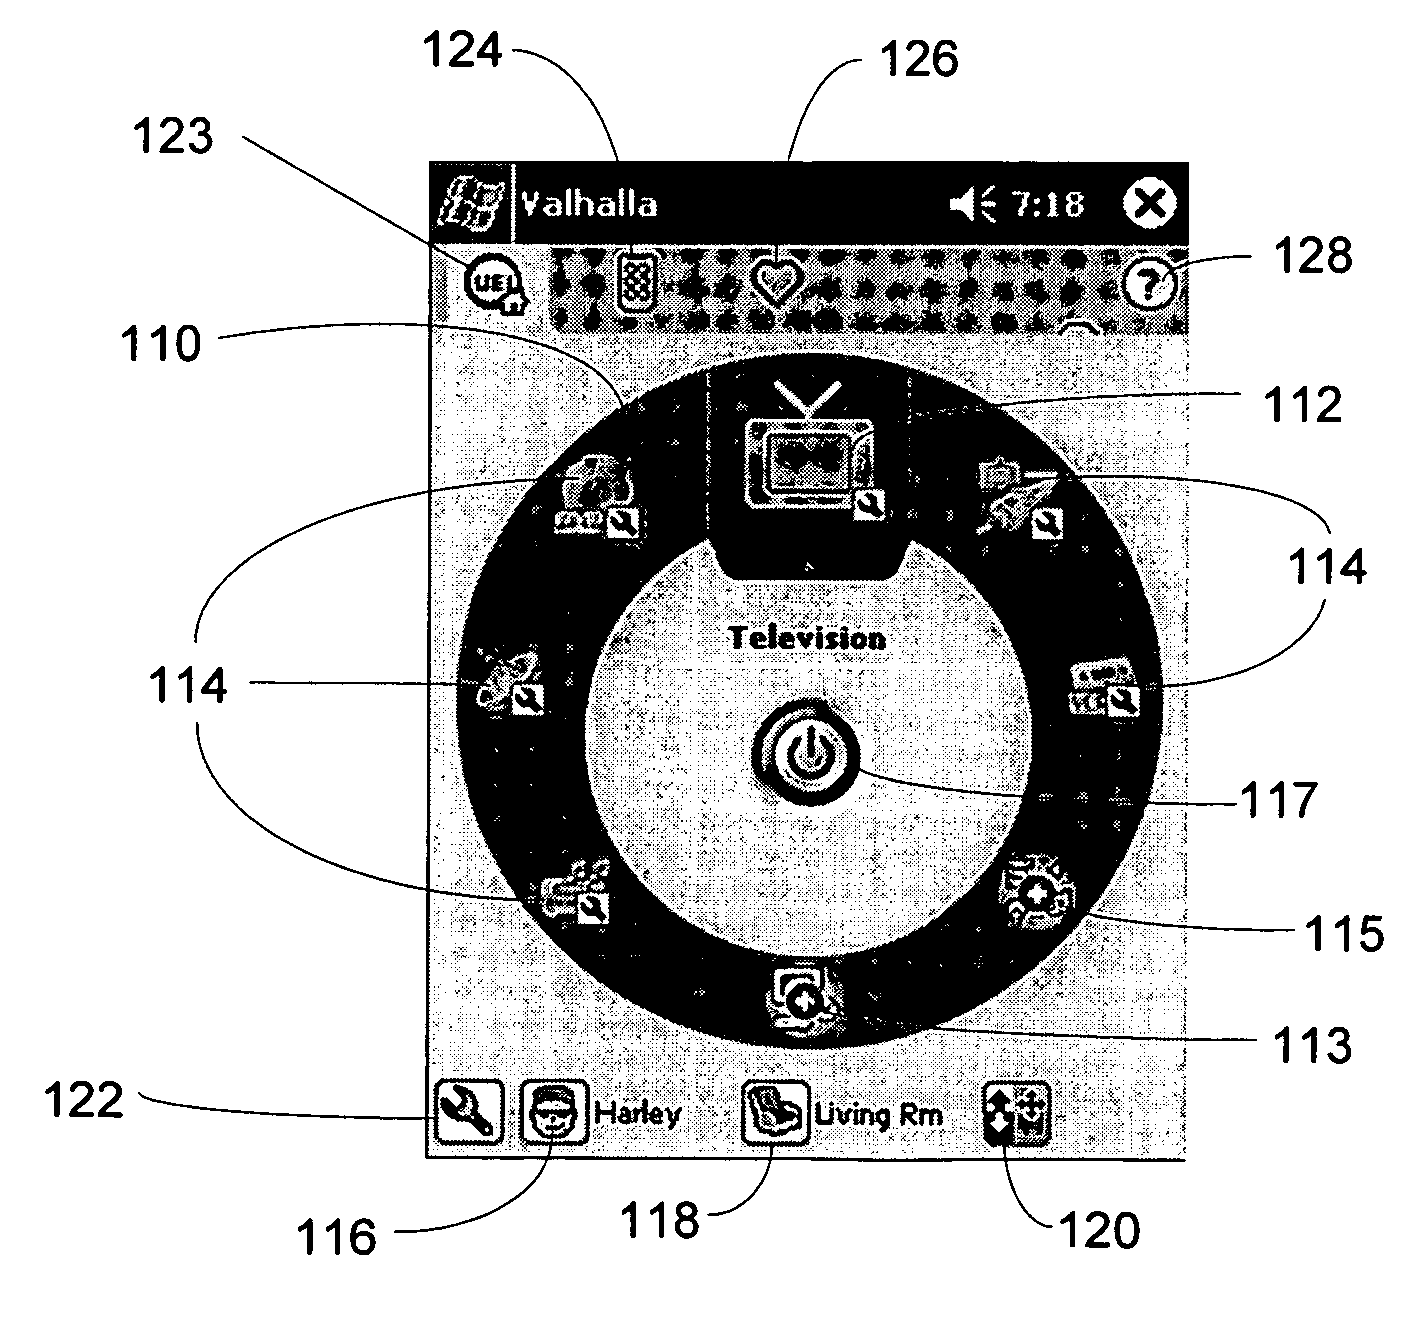 User interface for a remote control application